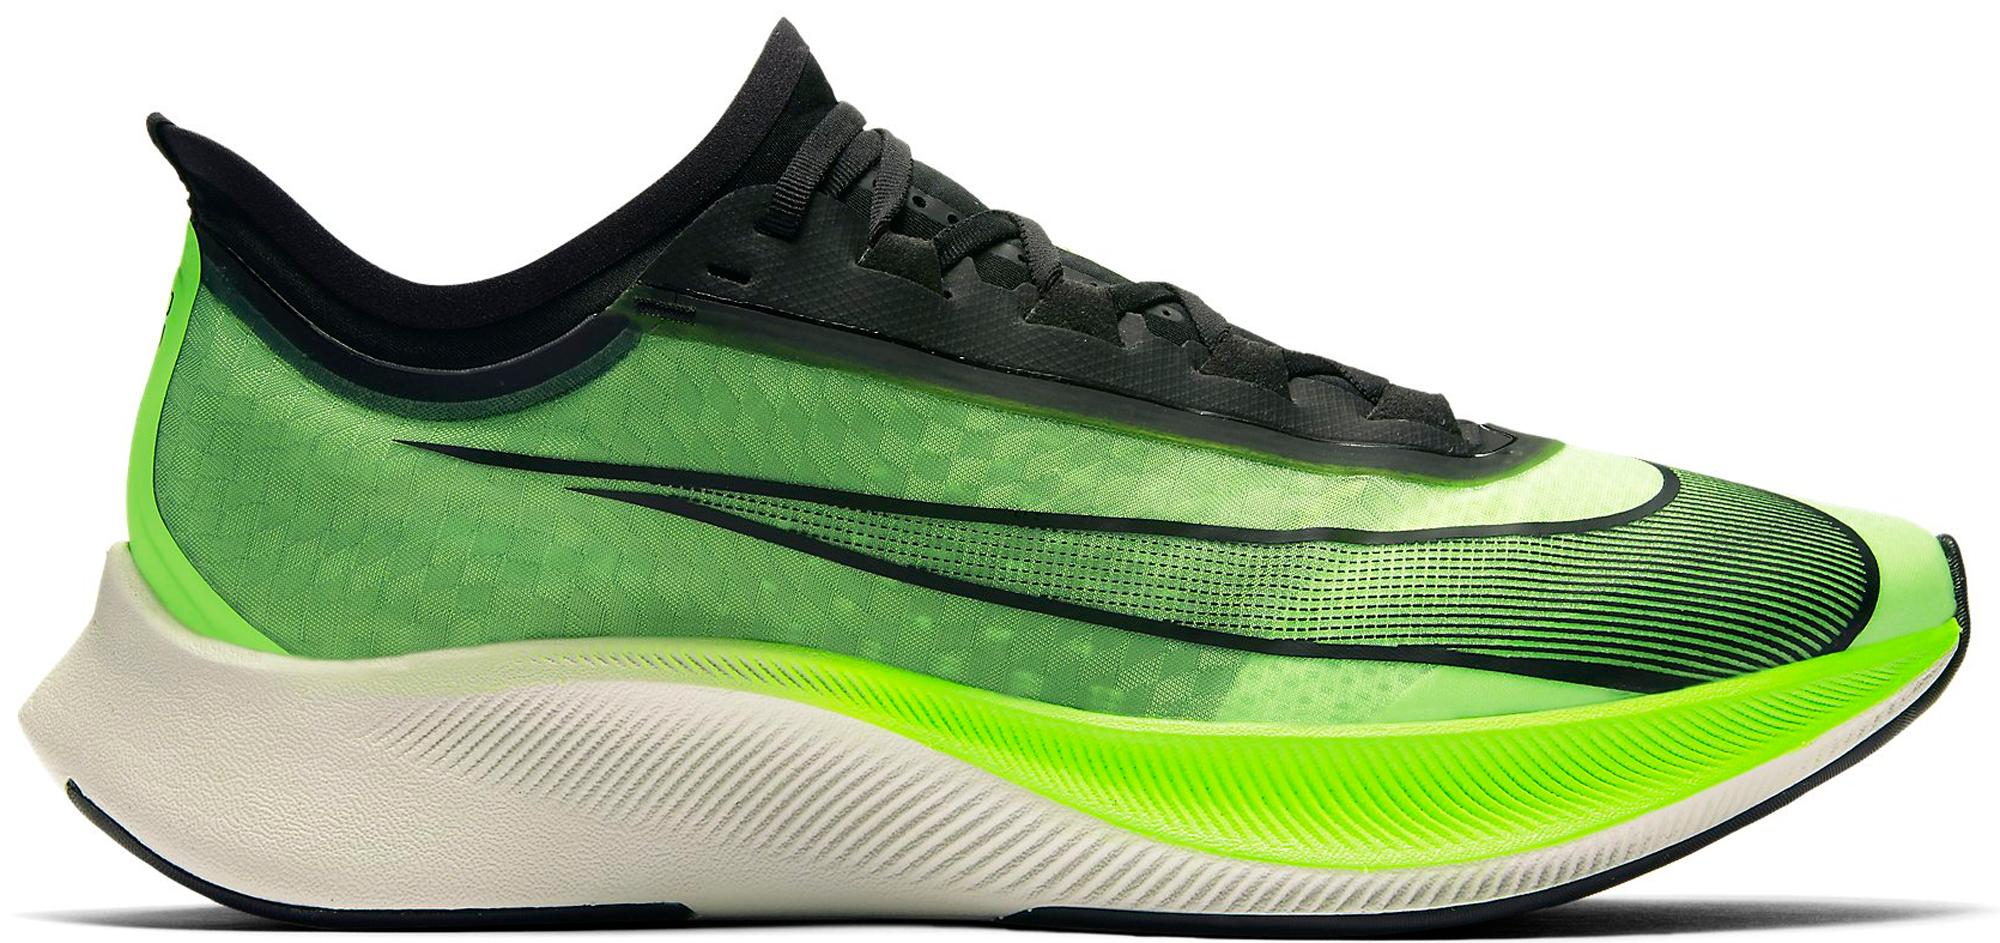 Nike Zoom Fly 3 Running Shoe in Electric Green (Green) for Men - Save ...